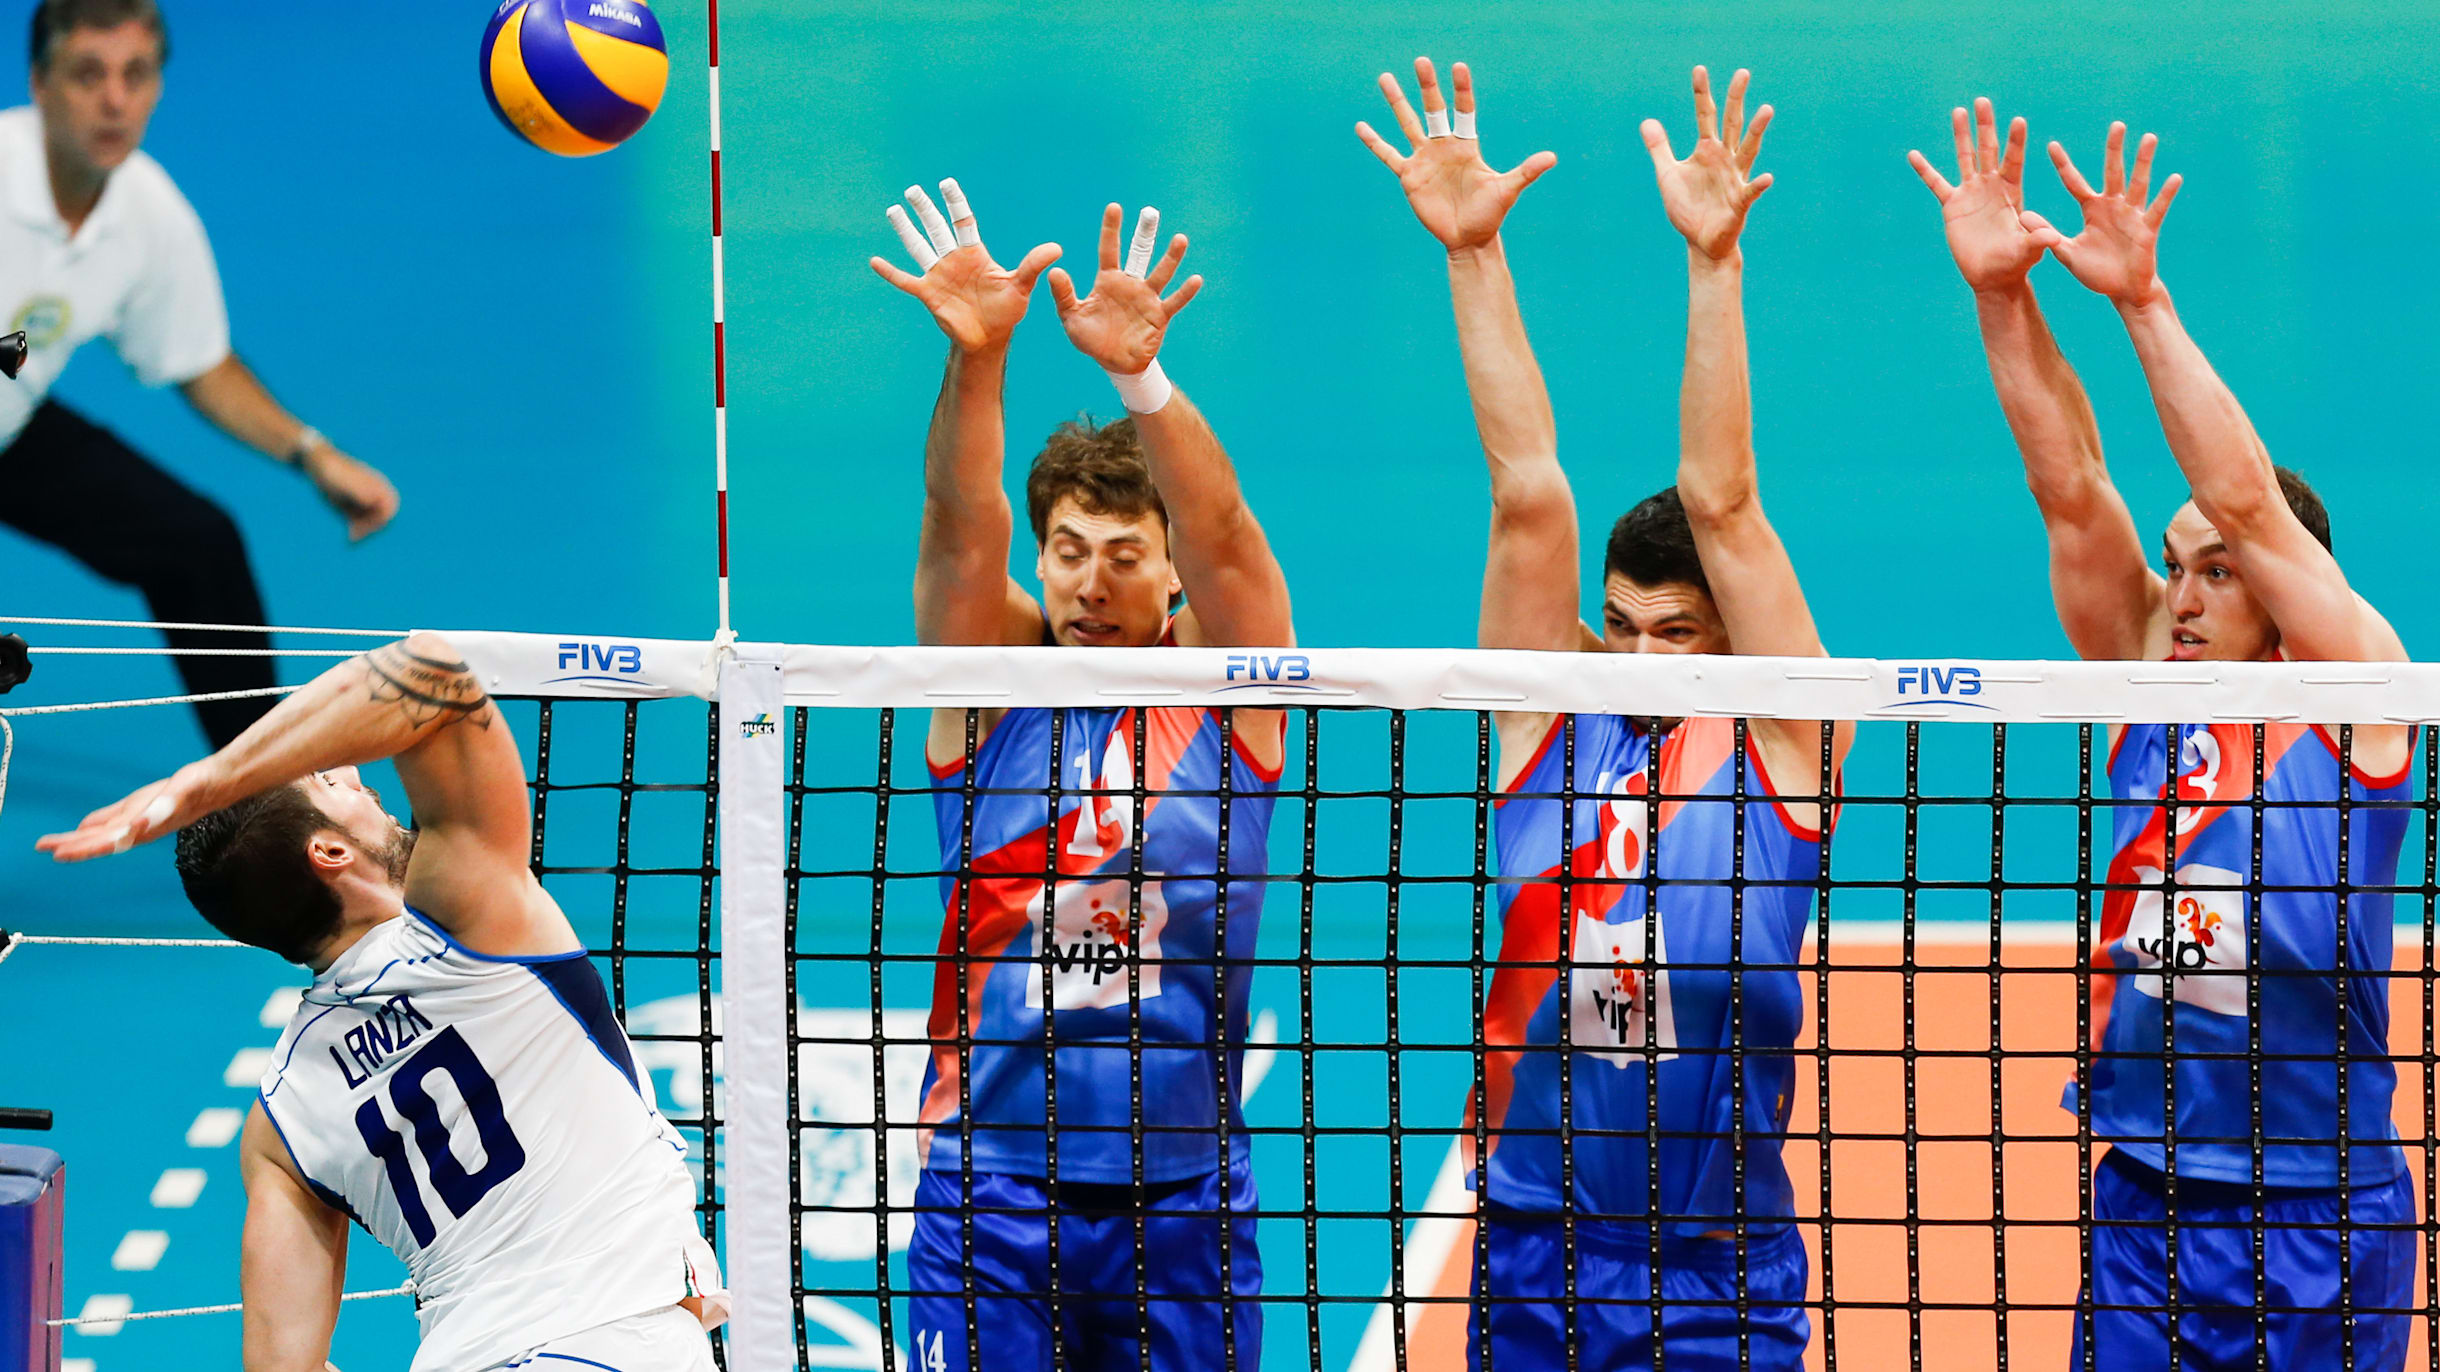 The Libero: Volleyball's Most Unique Position Explained